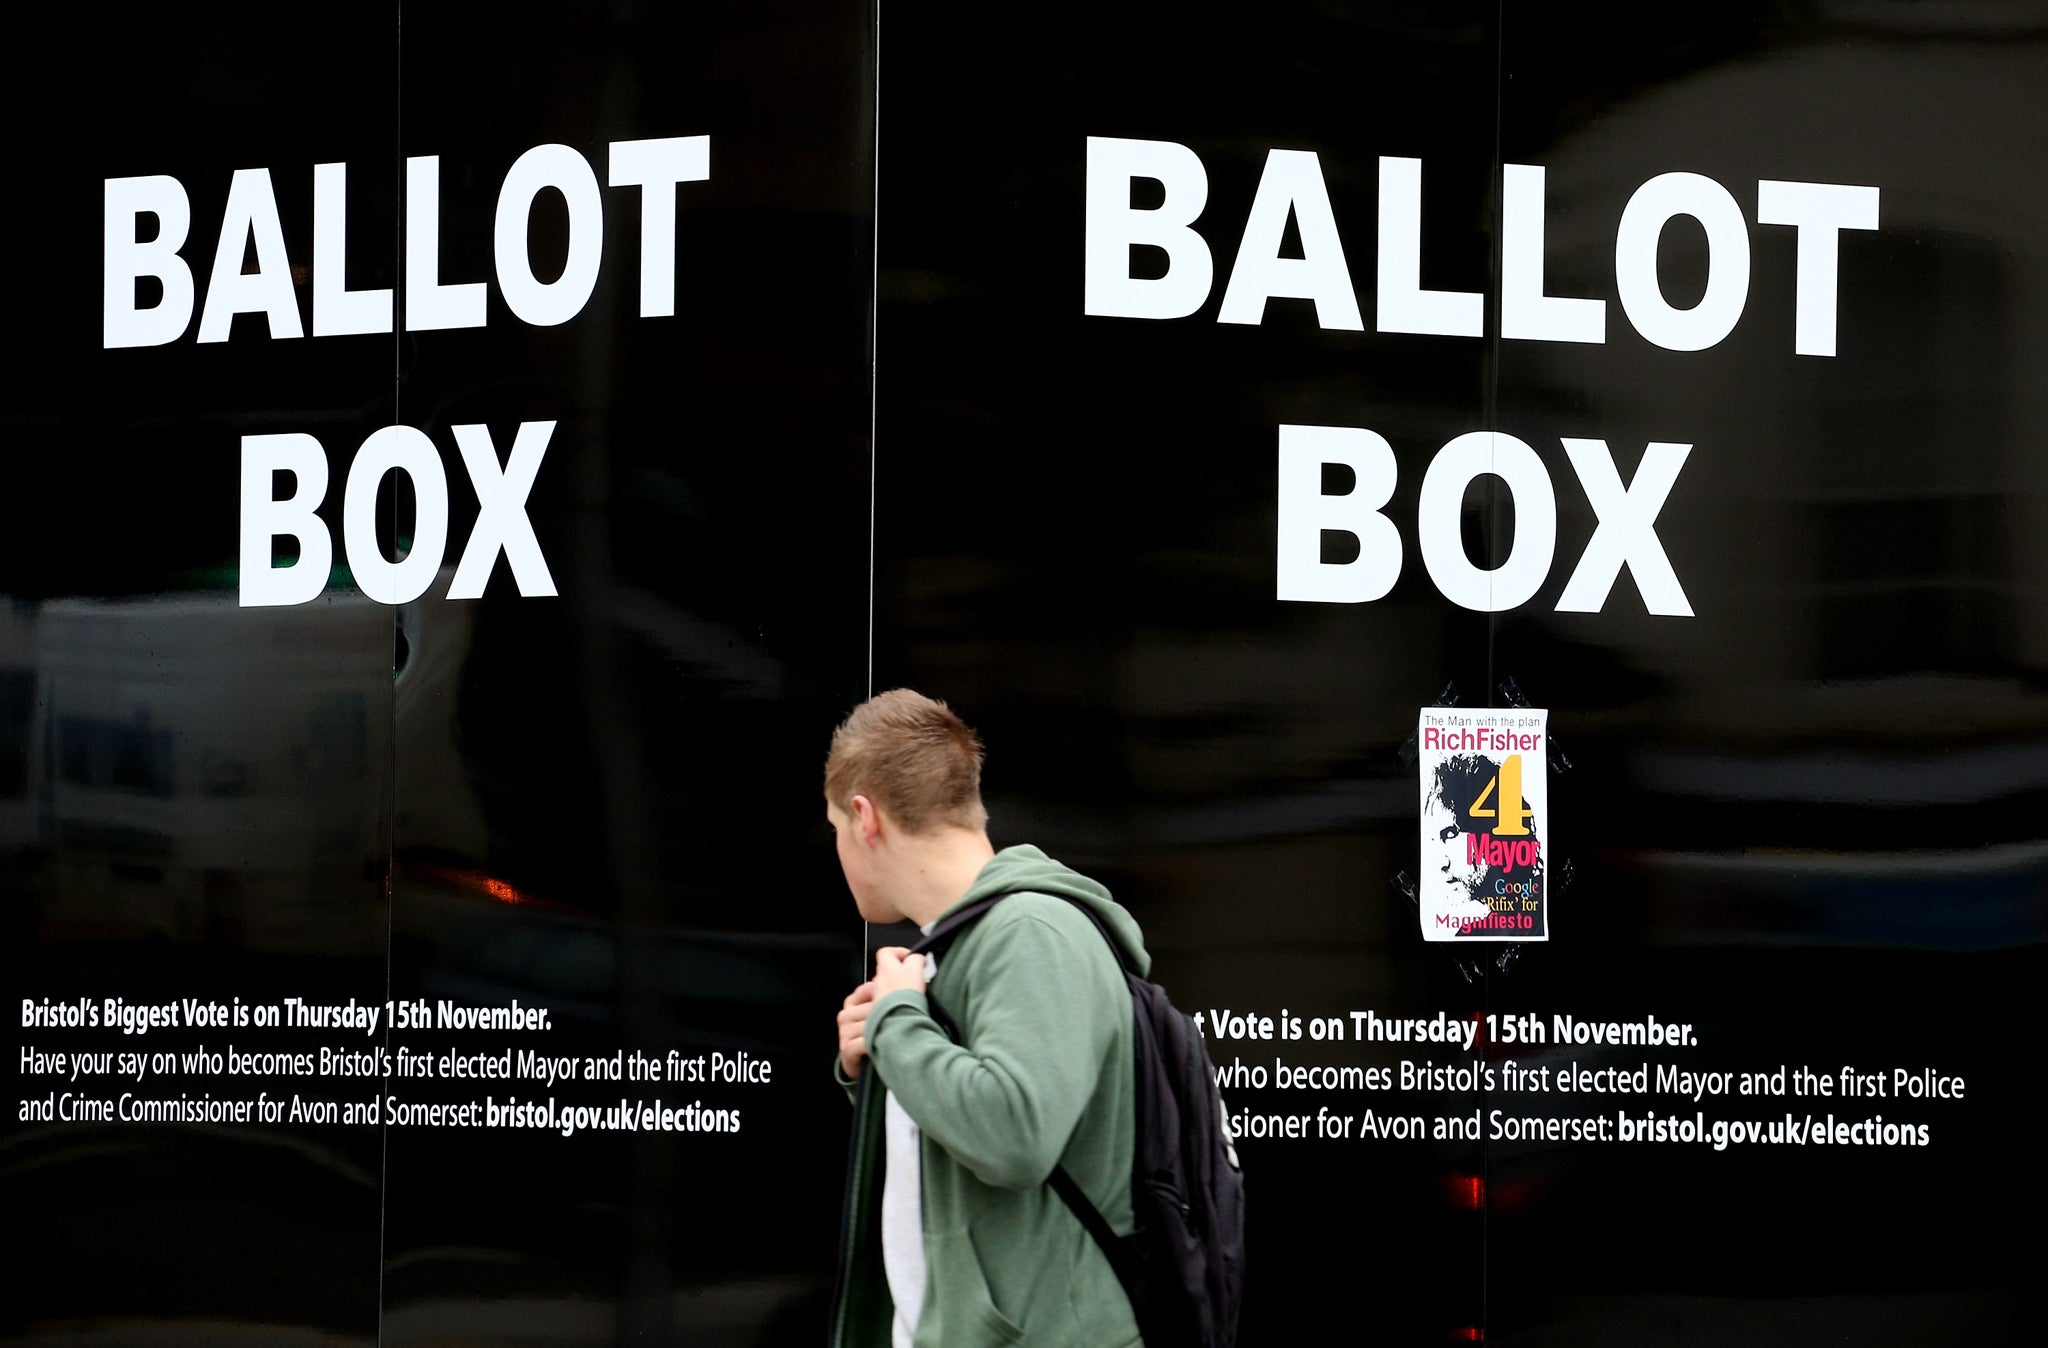 Even giant Ballot Boxes couldn't entice the public to vote at some polling stations